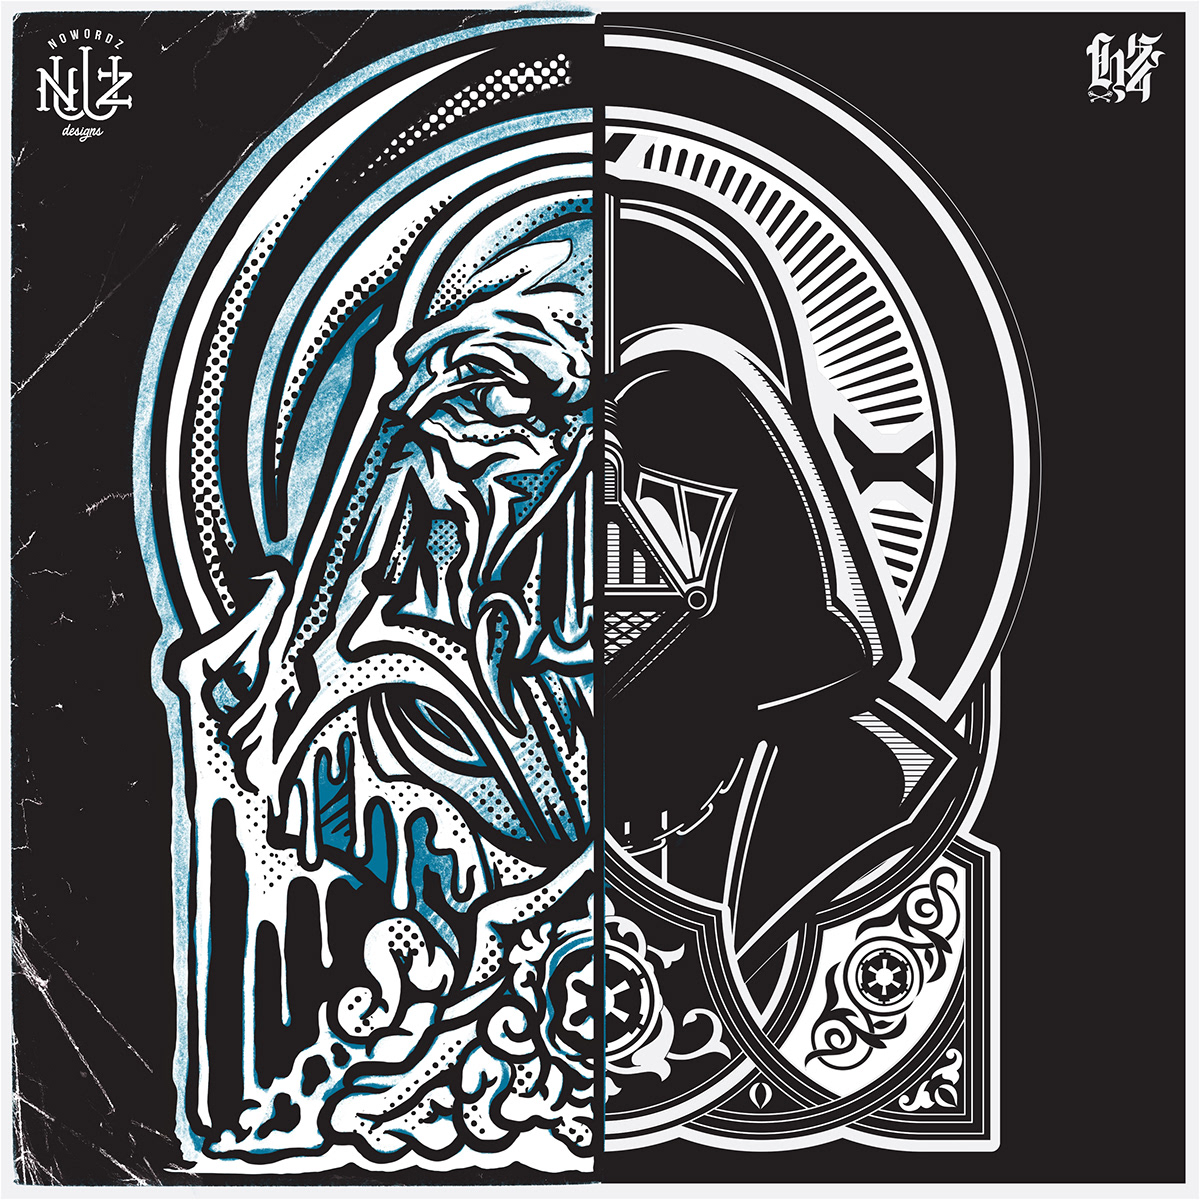 collab with hydro74 - darthvader